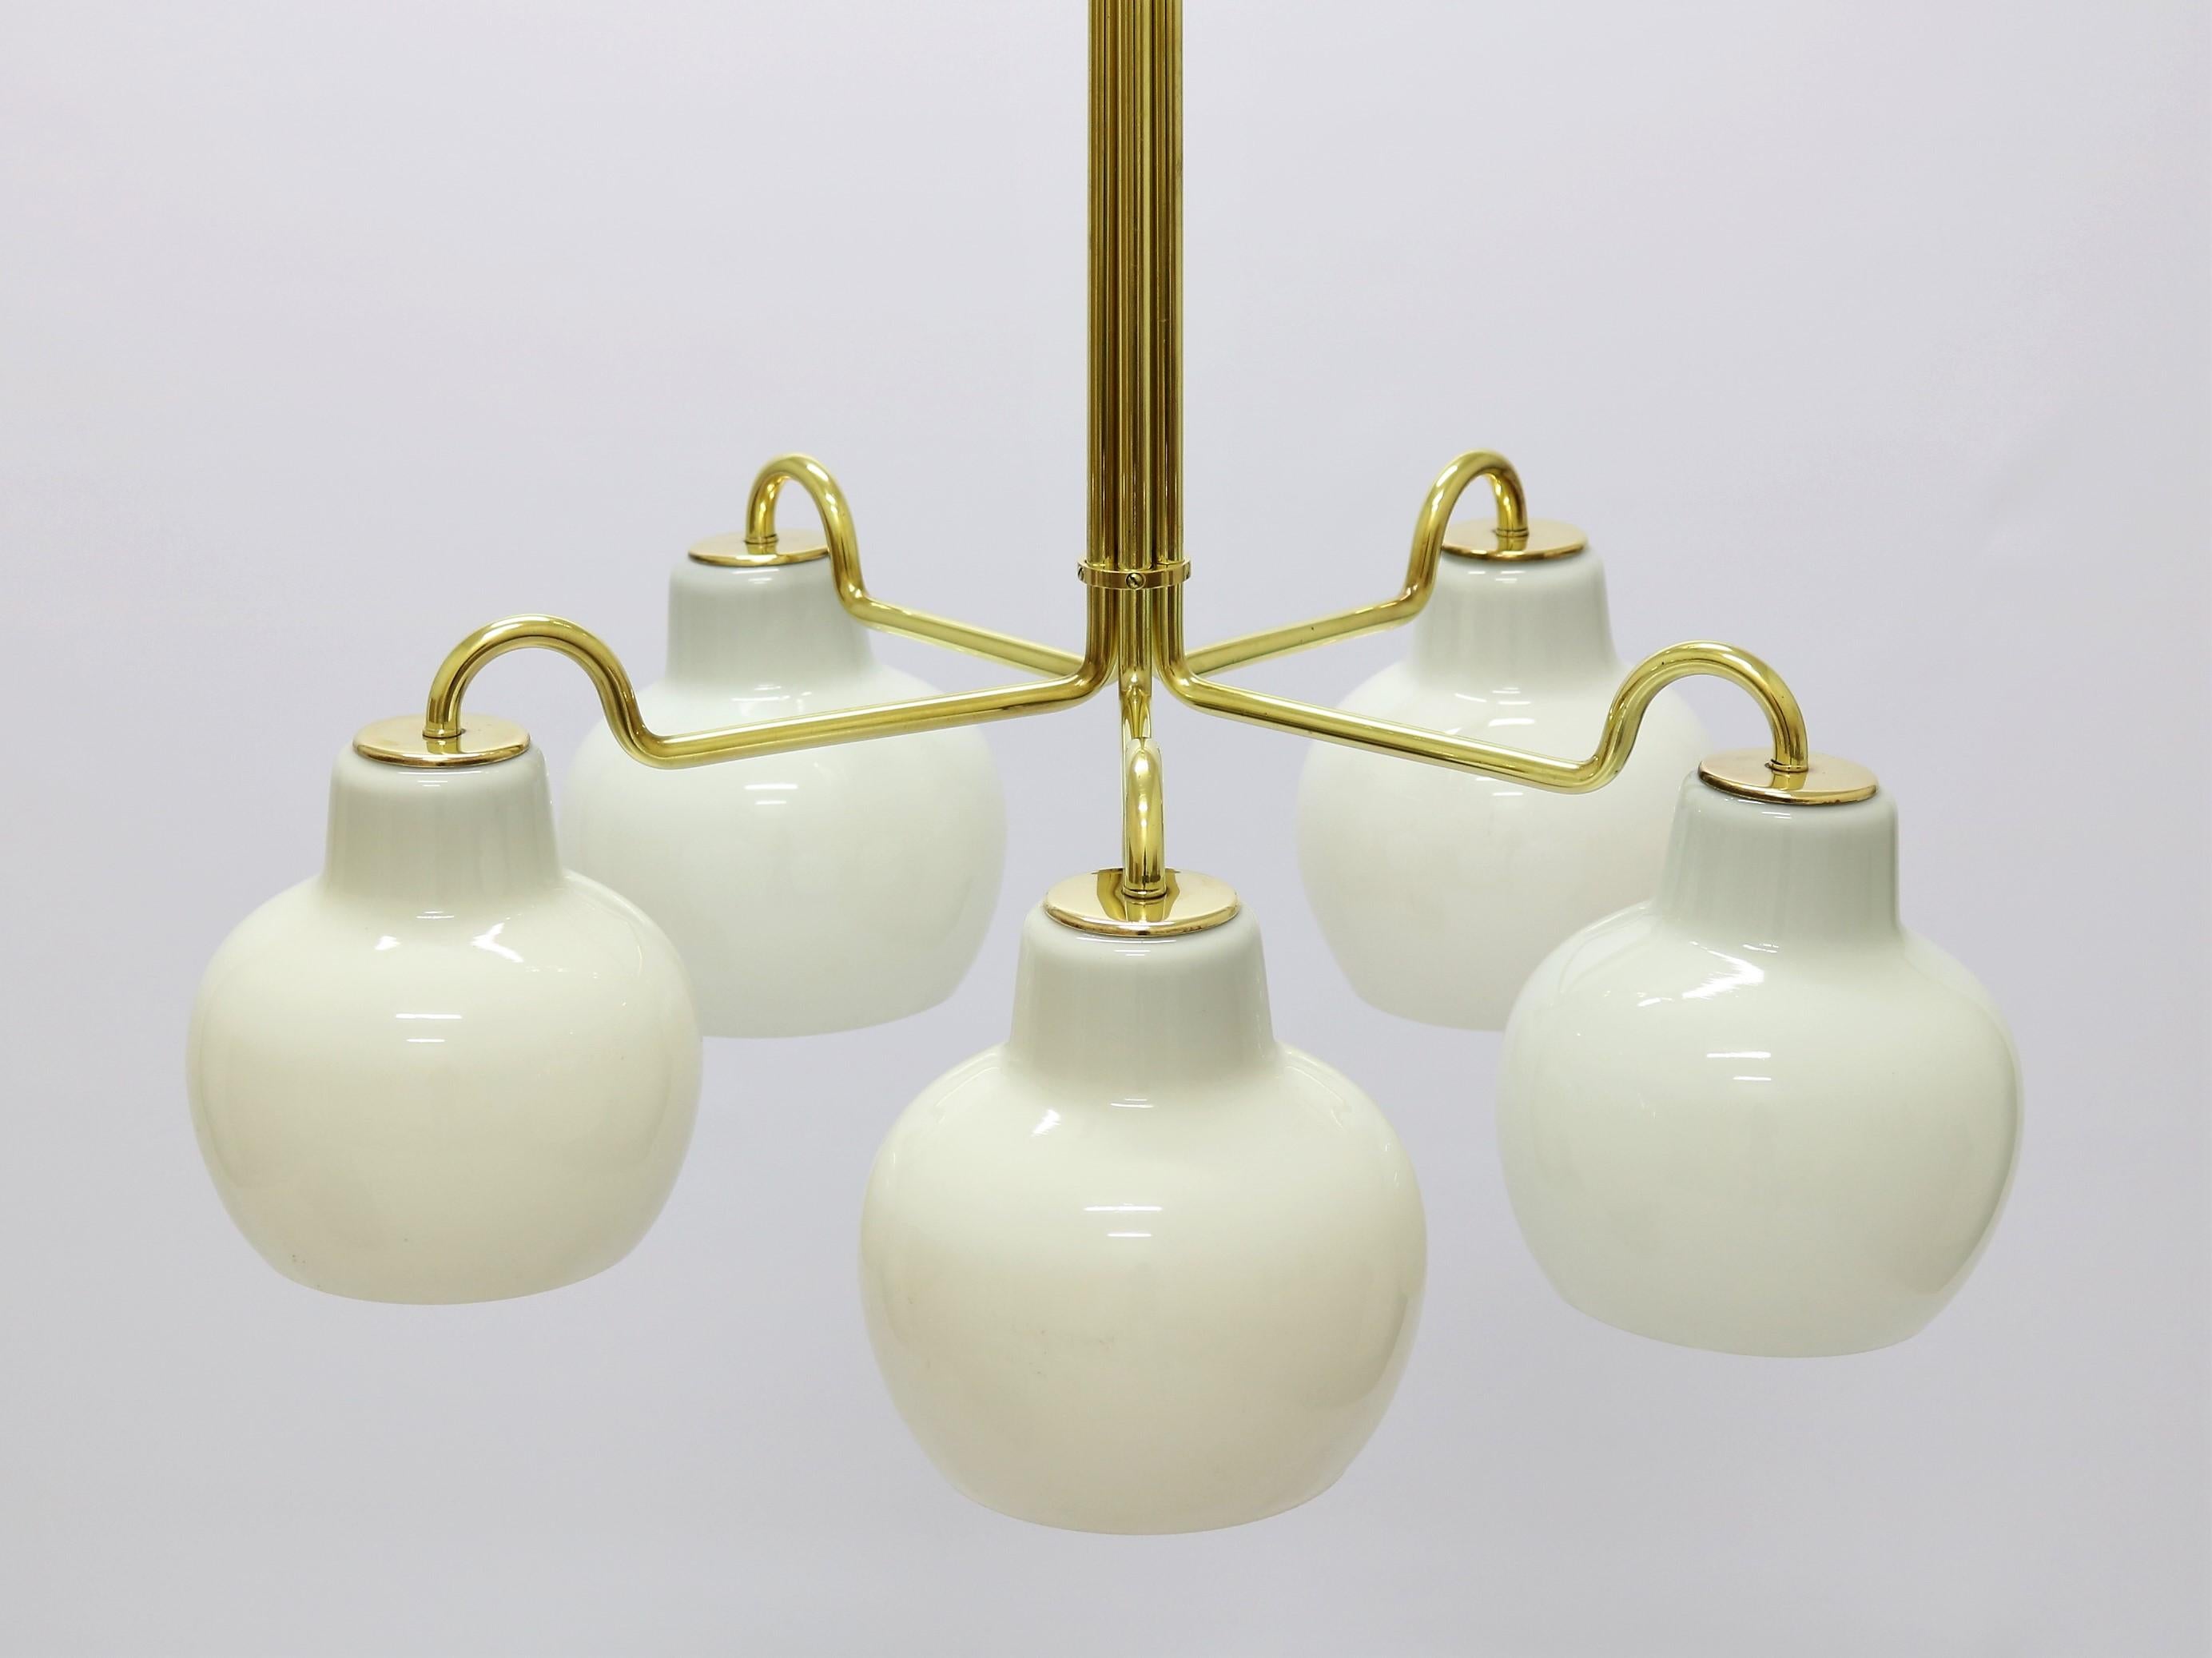 Rare Chandelier with 5 shades designed by Danish designer Vilhelm Lauritzen. Produced by Louis Poulsen, Denmark in the 1950s. Brass and shades of Opal glass.